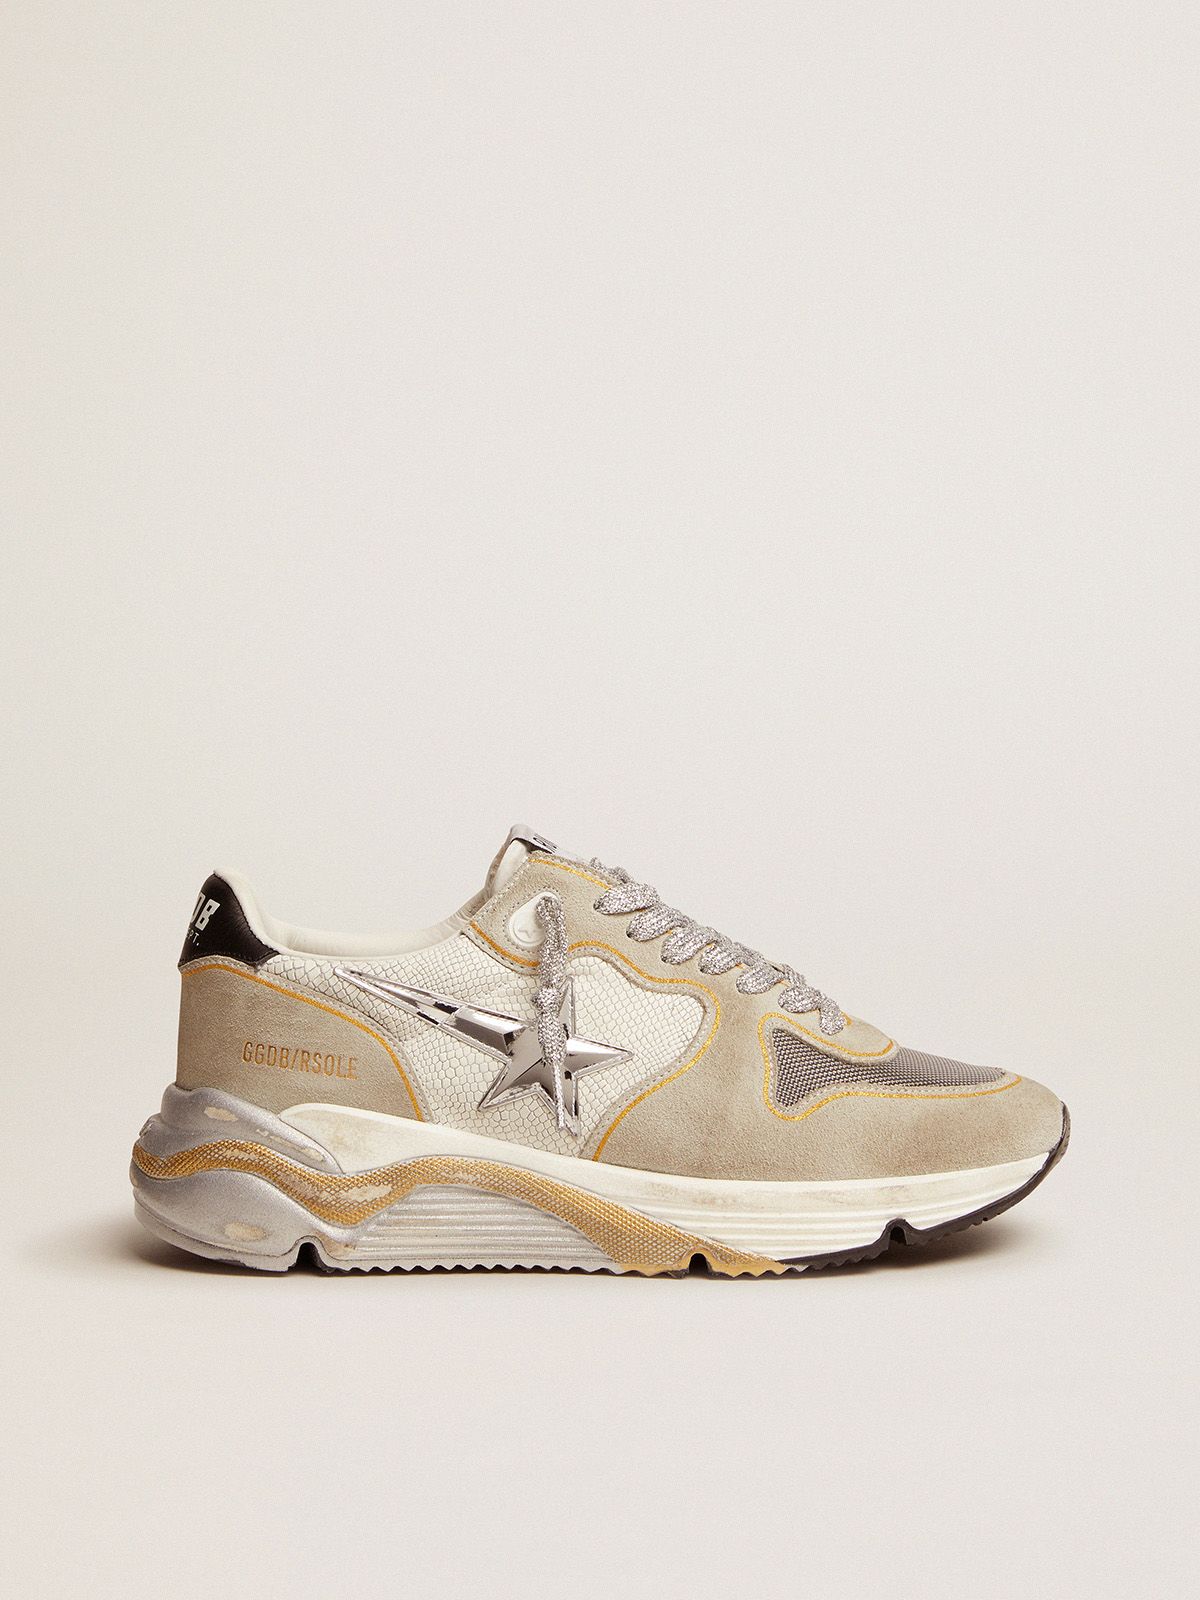 golden goose with in white Sole Running sneakers LTD insert and suede leather snake-print mesh